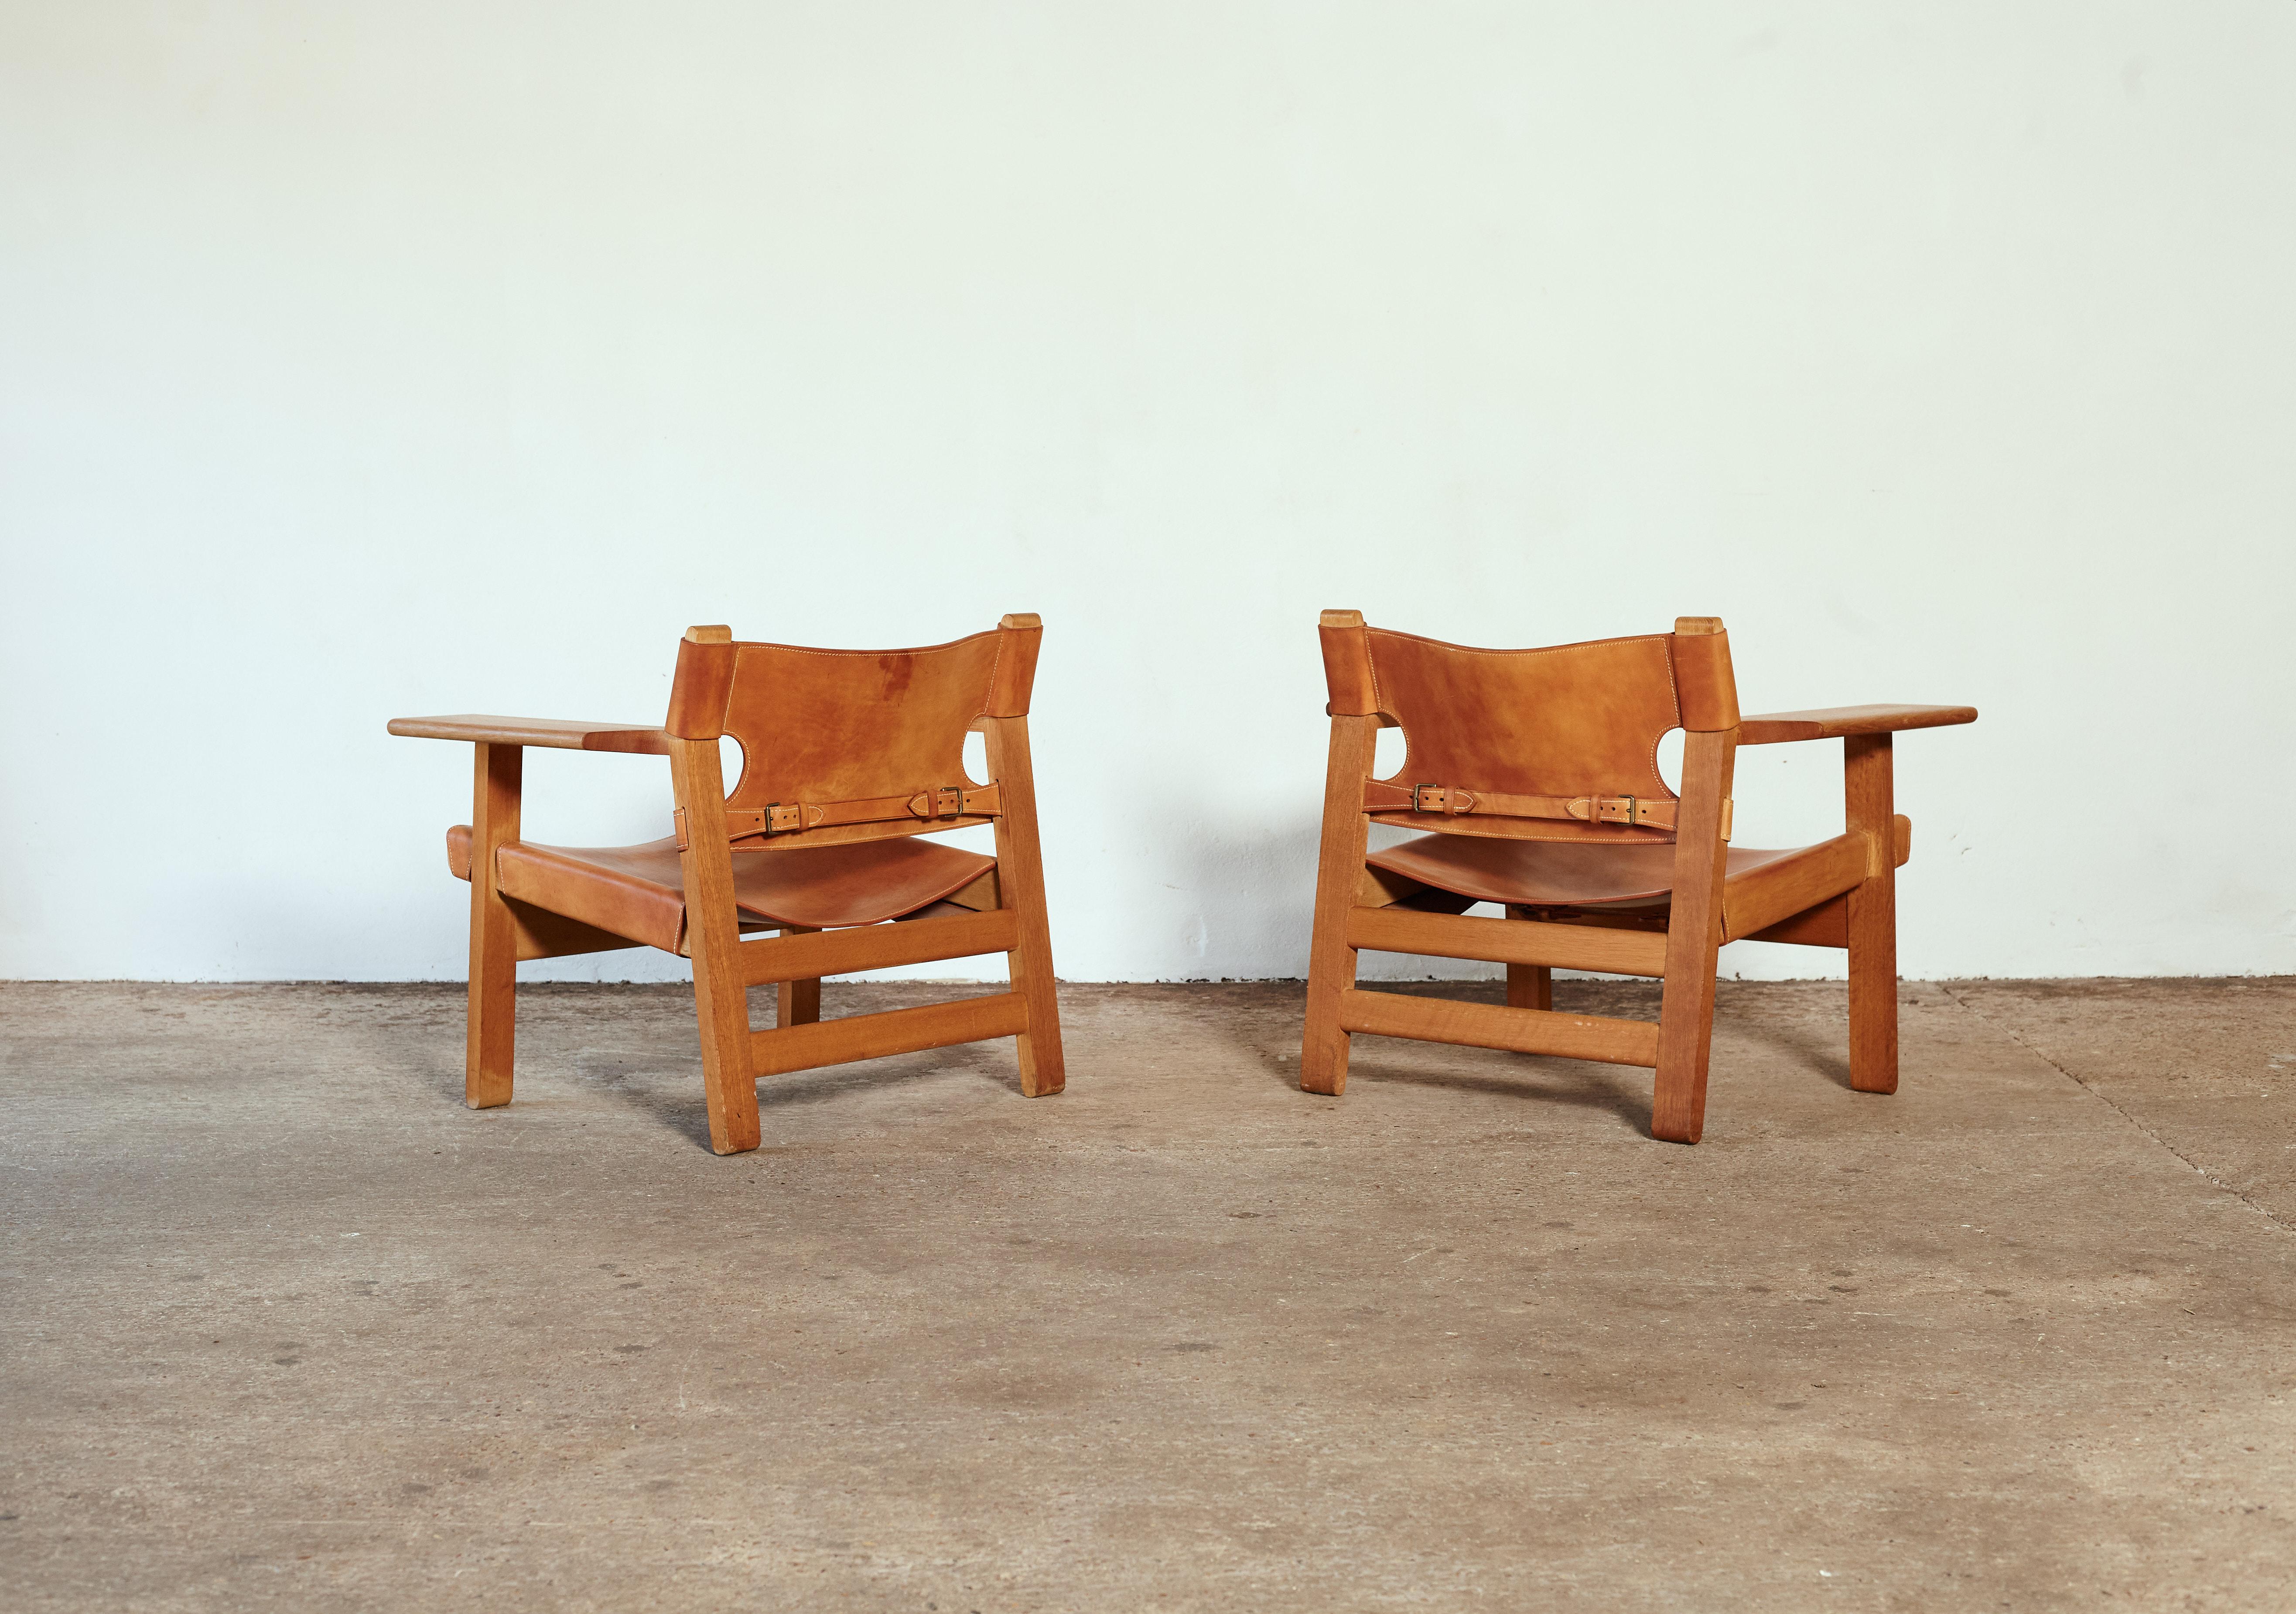 A lovely pair of Spanish chairs, in solid oak and gently patinated cognac leather, designed by Børge Mogensen for Fredericia Stolefabrik, Denmark, in 1958. Very good vintage condition. 





This item only ships to the US.